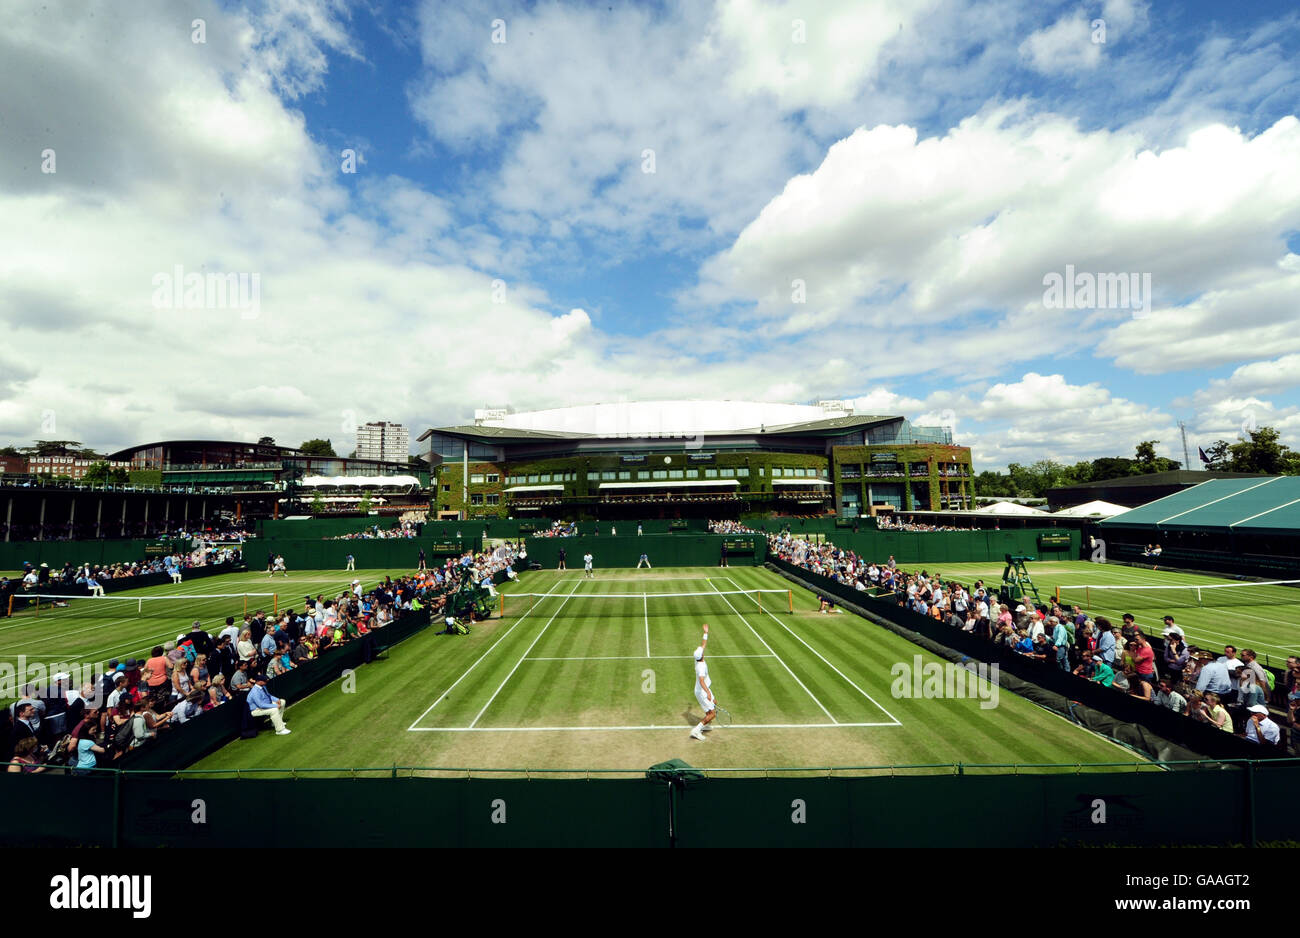 Ben Draper takes on Olukayode Alafia Damina on day seven of the Wimbledon Championships at the All England Lawn Tennis and Croquet Club, Wimbledon. Stock Photo